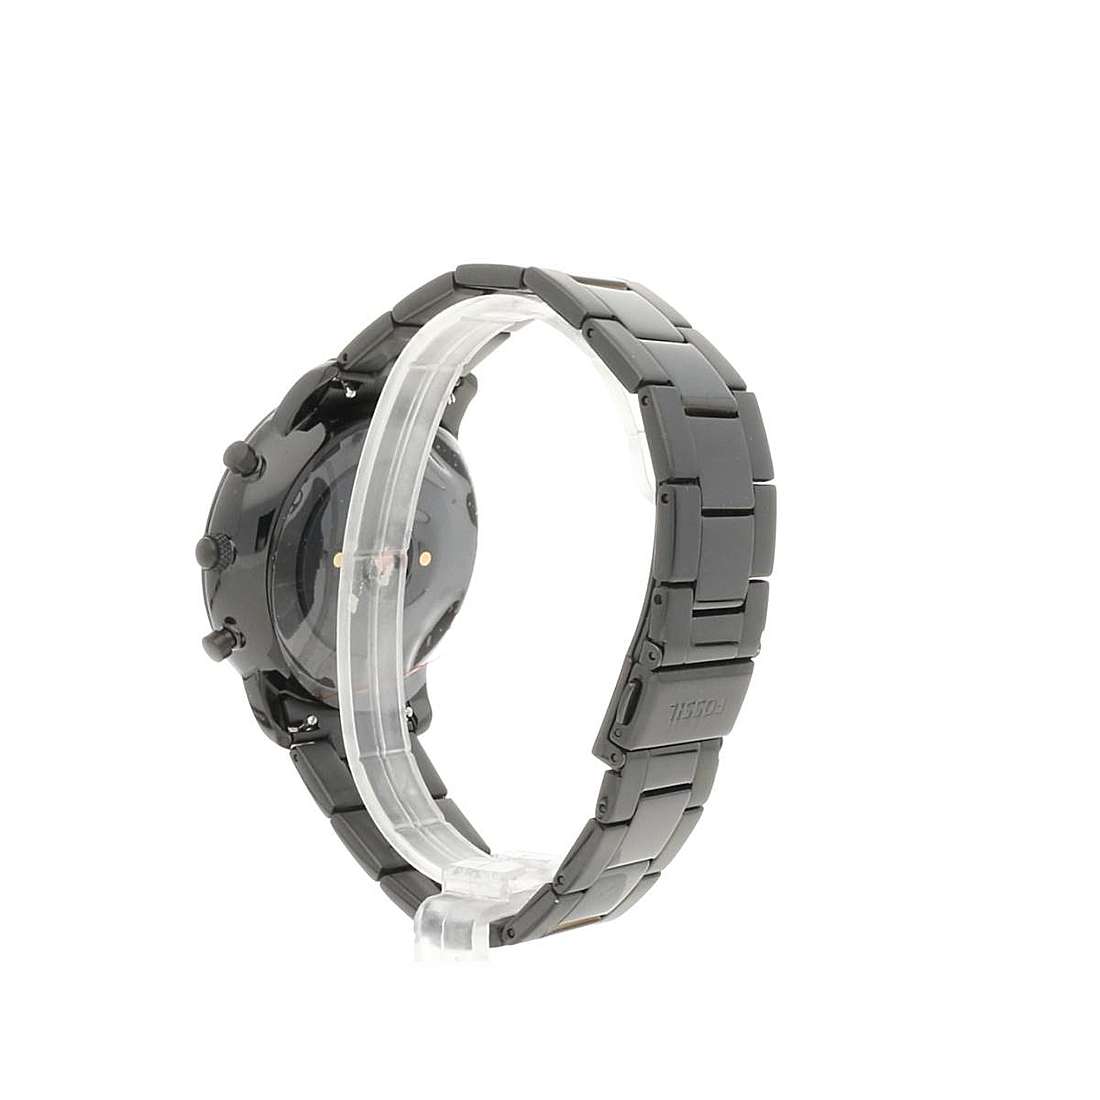 Offres montres homme Fossil FTW7027